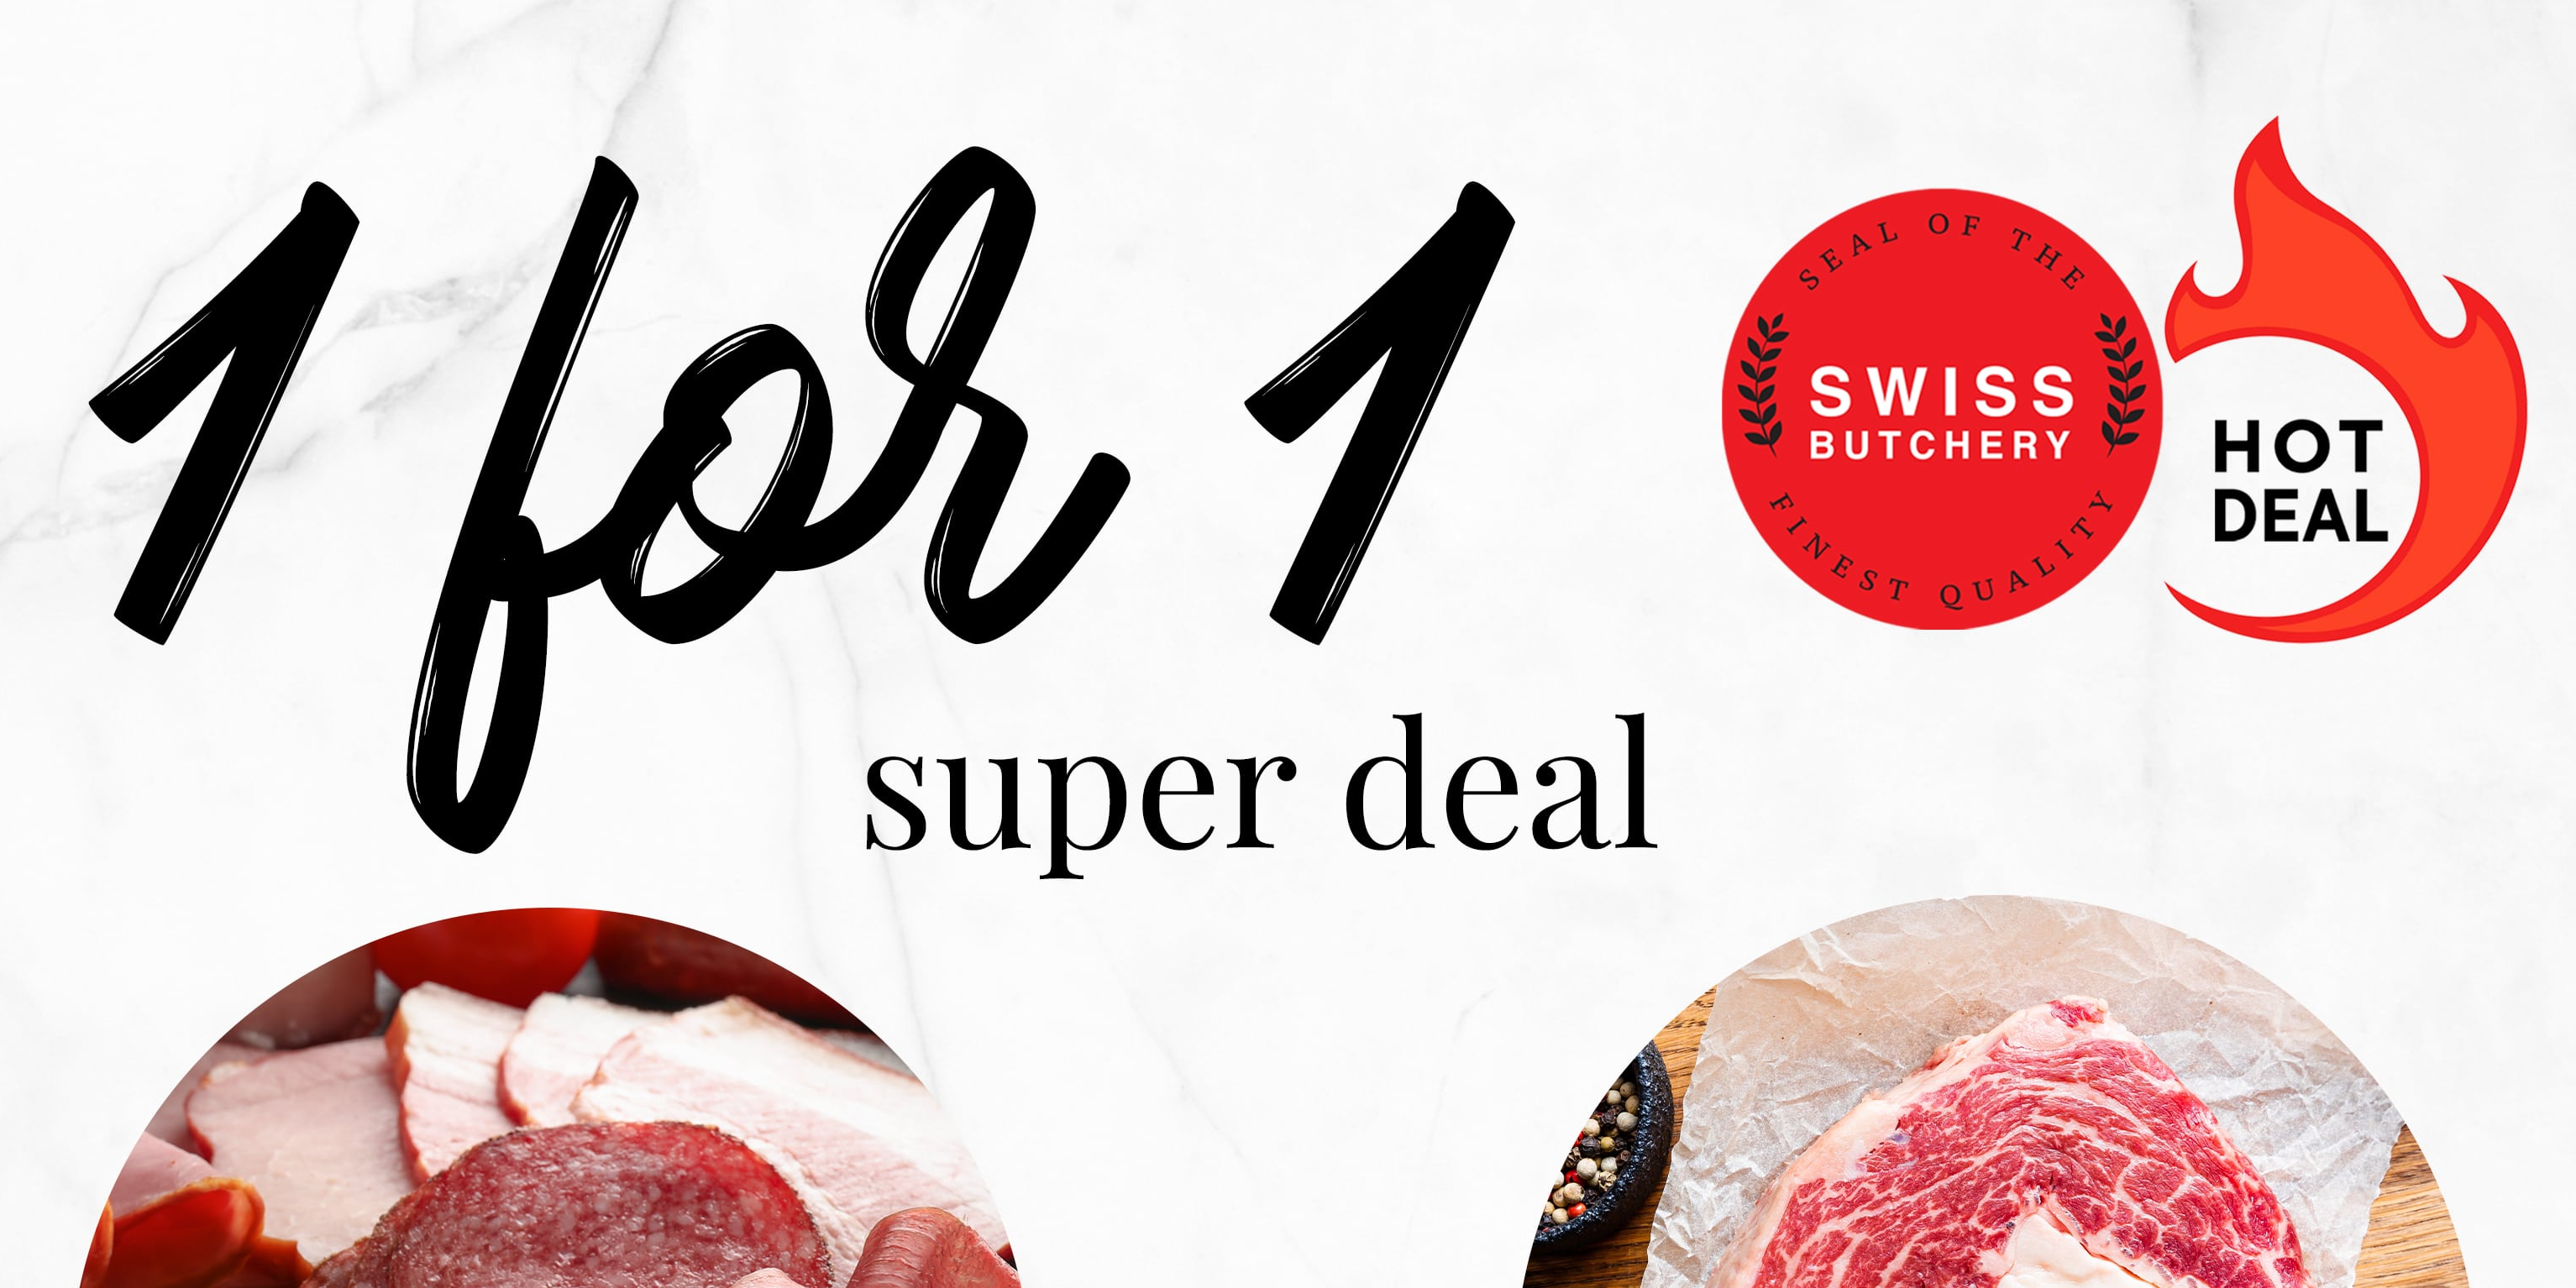 Exclusive 1-for-1 deals for selected Premium Meat + Buy 2 Get 1 Free for Freshly-baked Pastries!